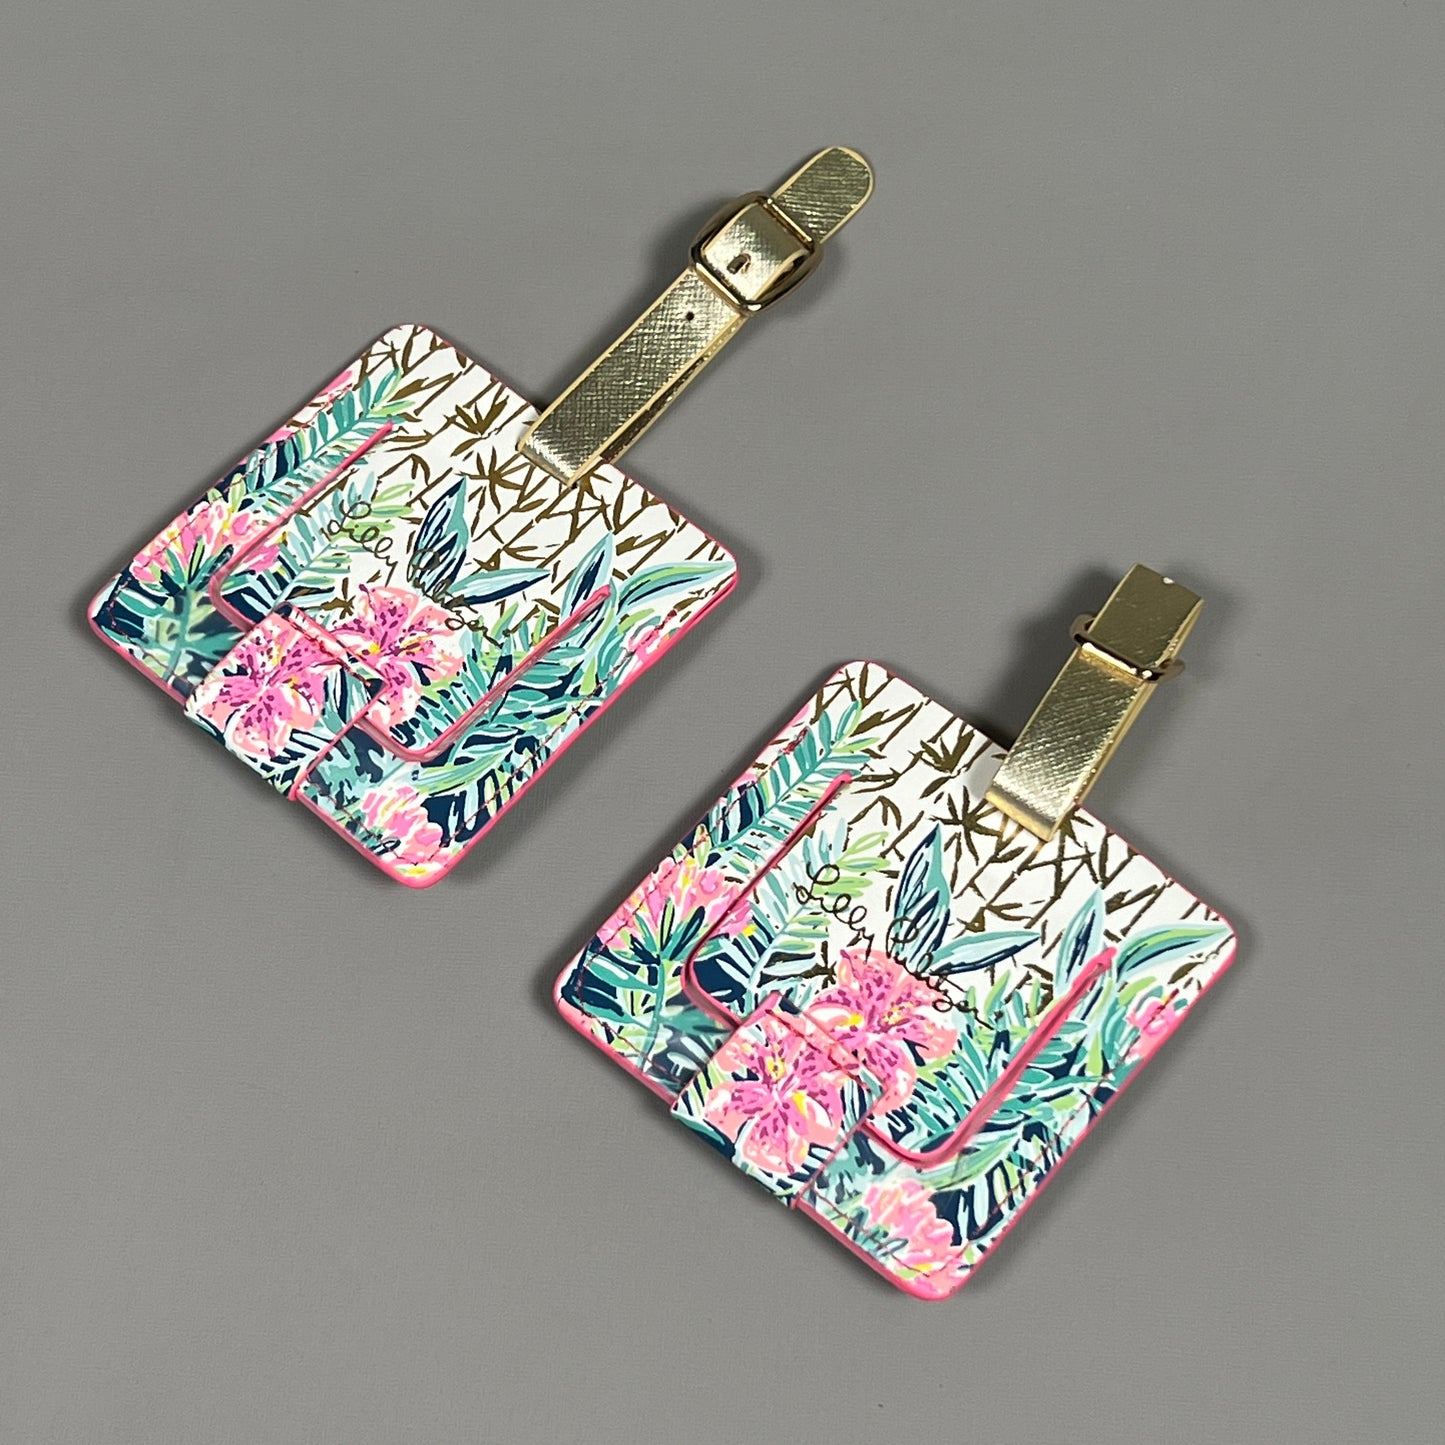 LILLY PULITZER Passport and Luggage Tags Travel Set Slathouse Soiree Multi-color Floral (New)